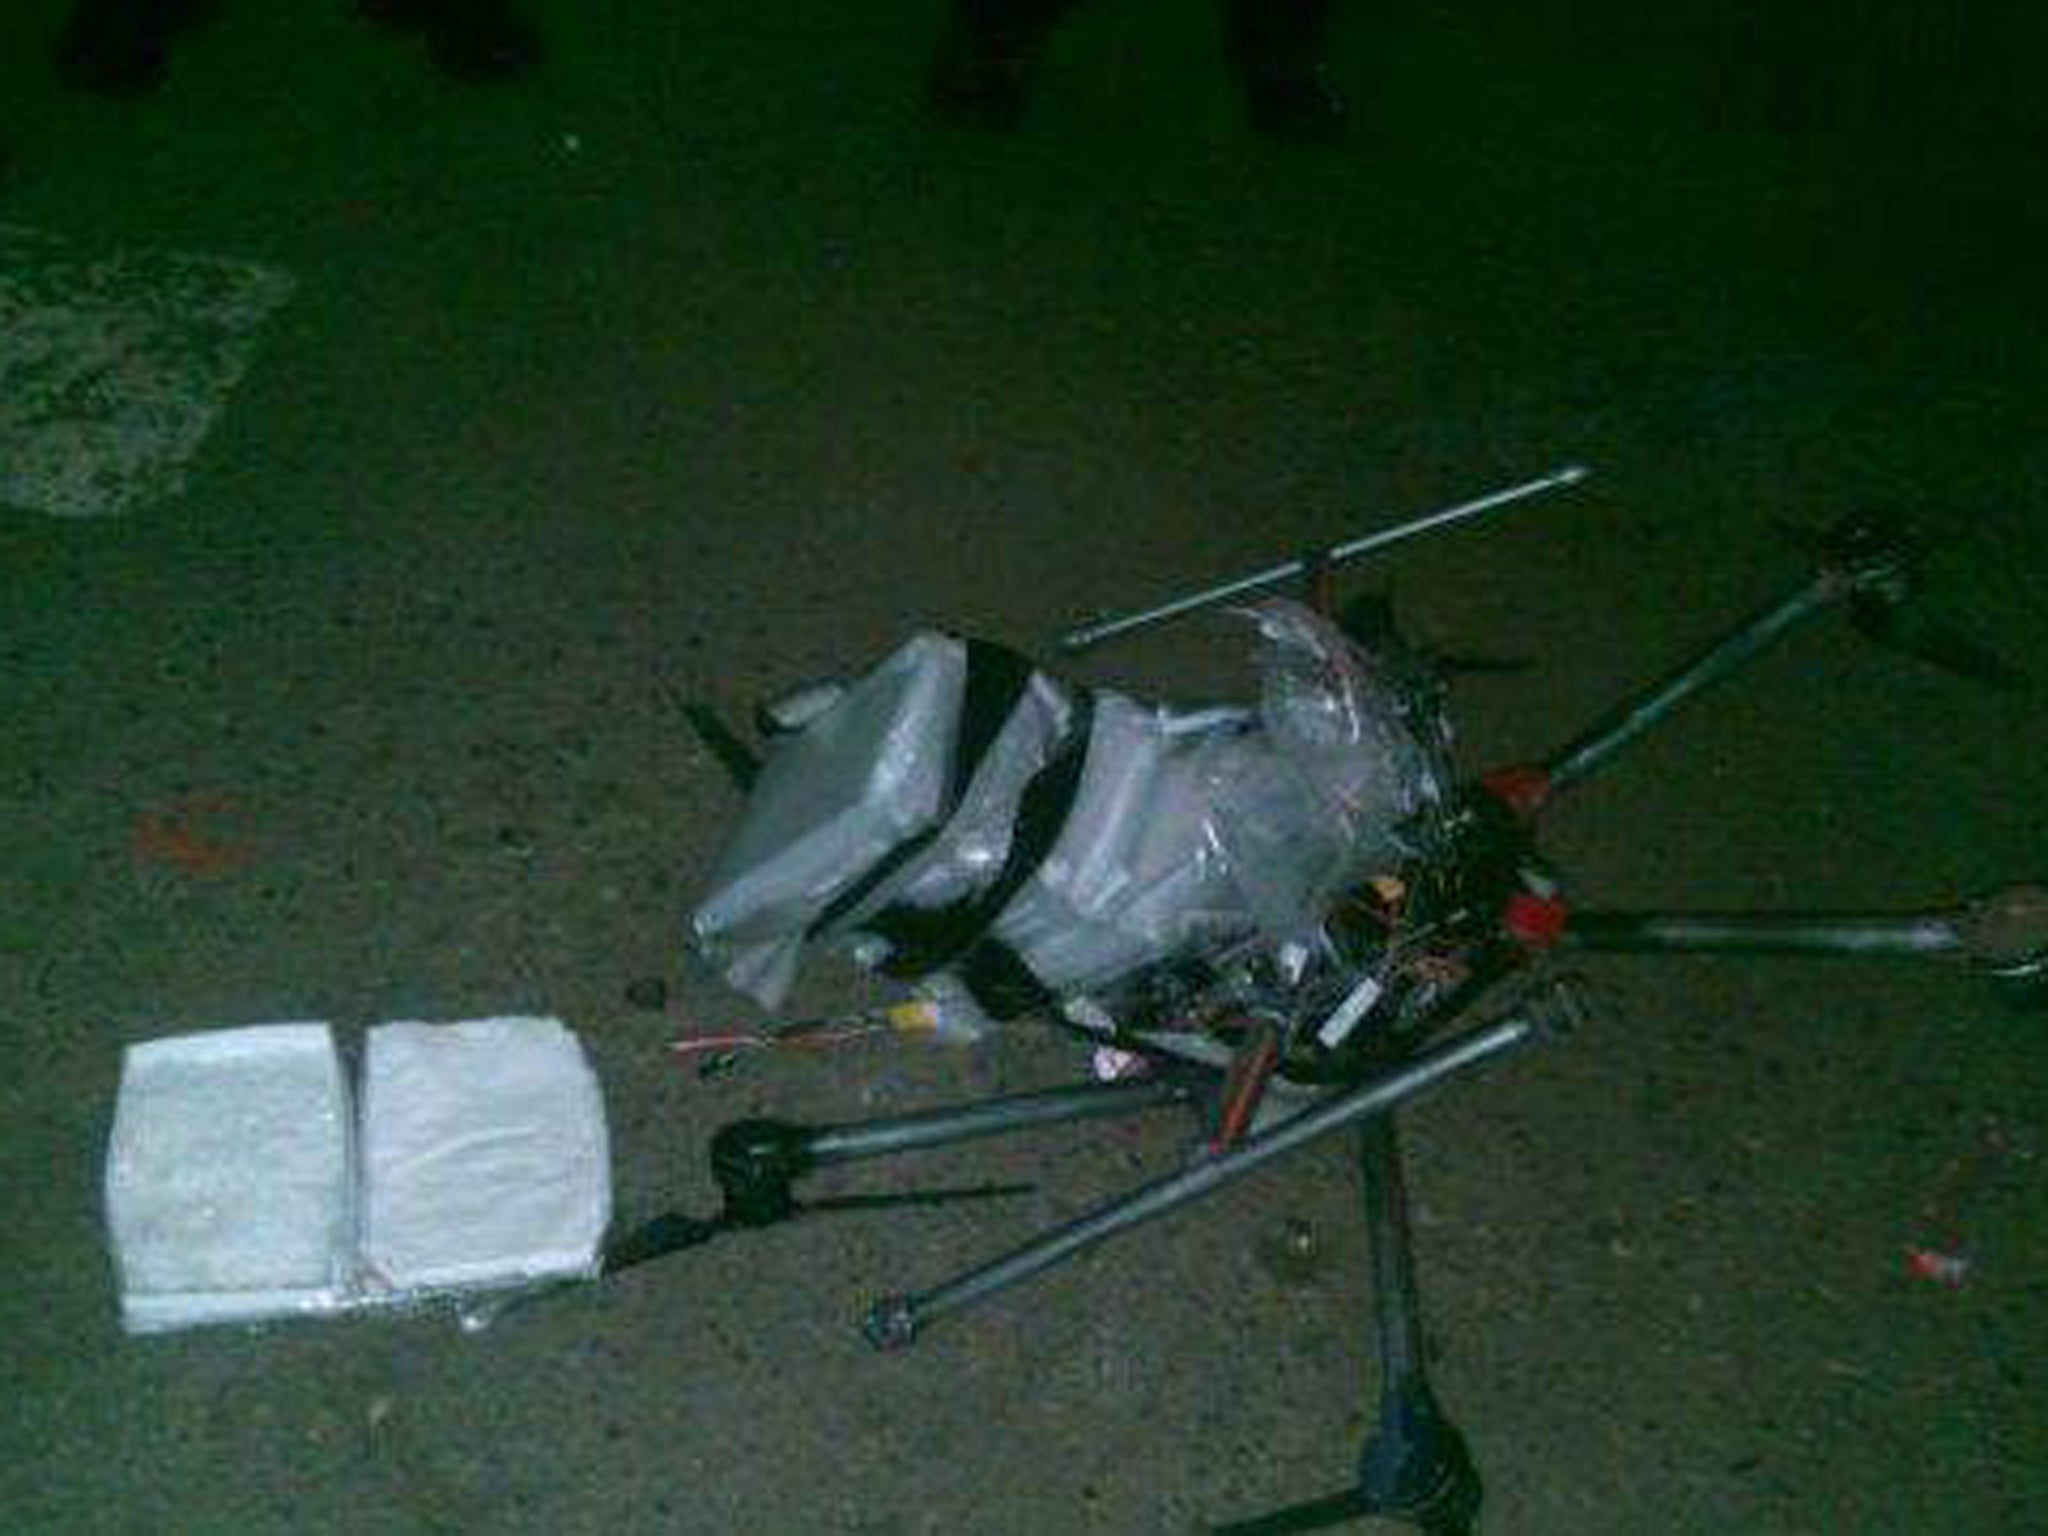 The drone, in a picture taken after it crashed into a car park